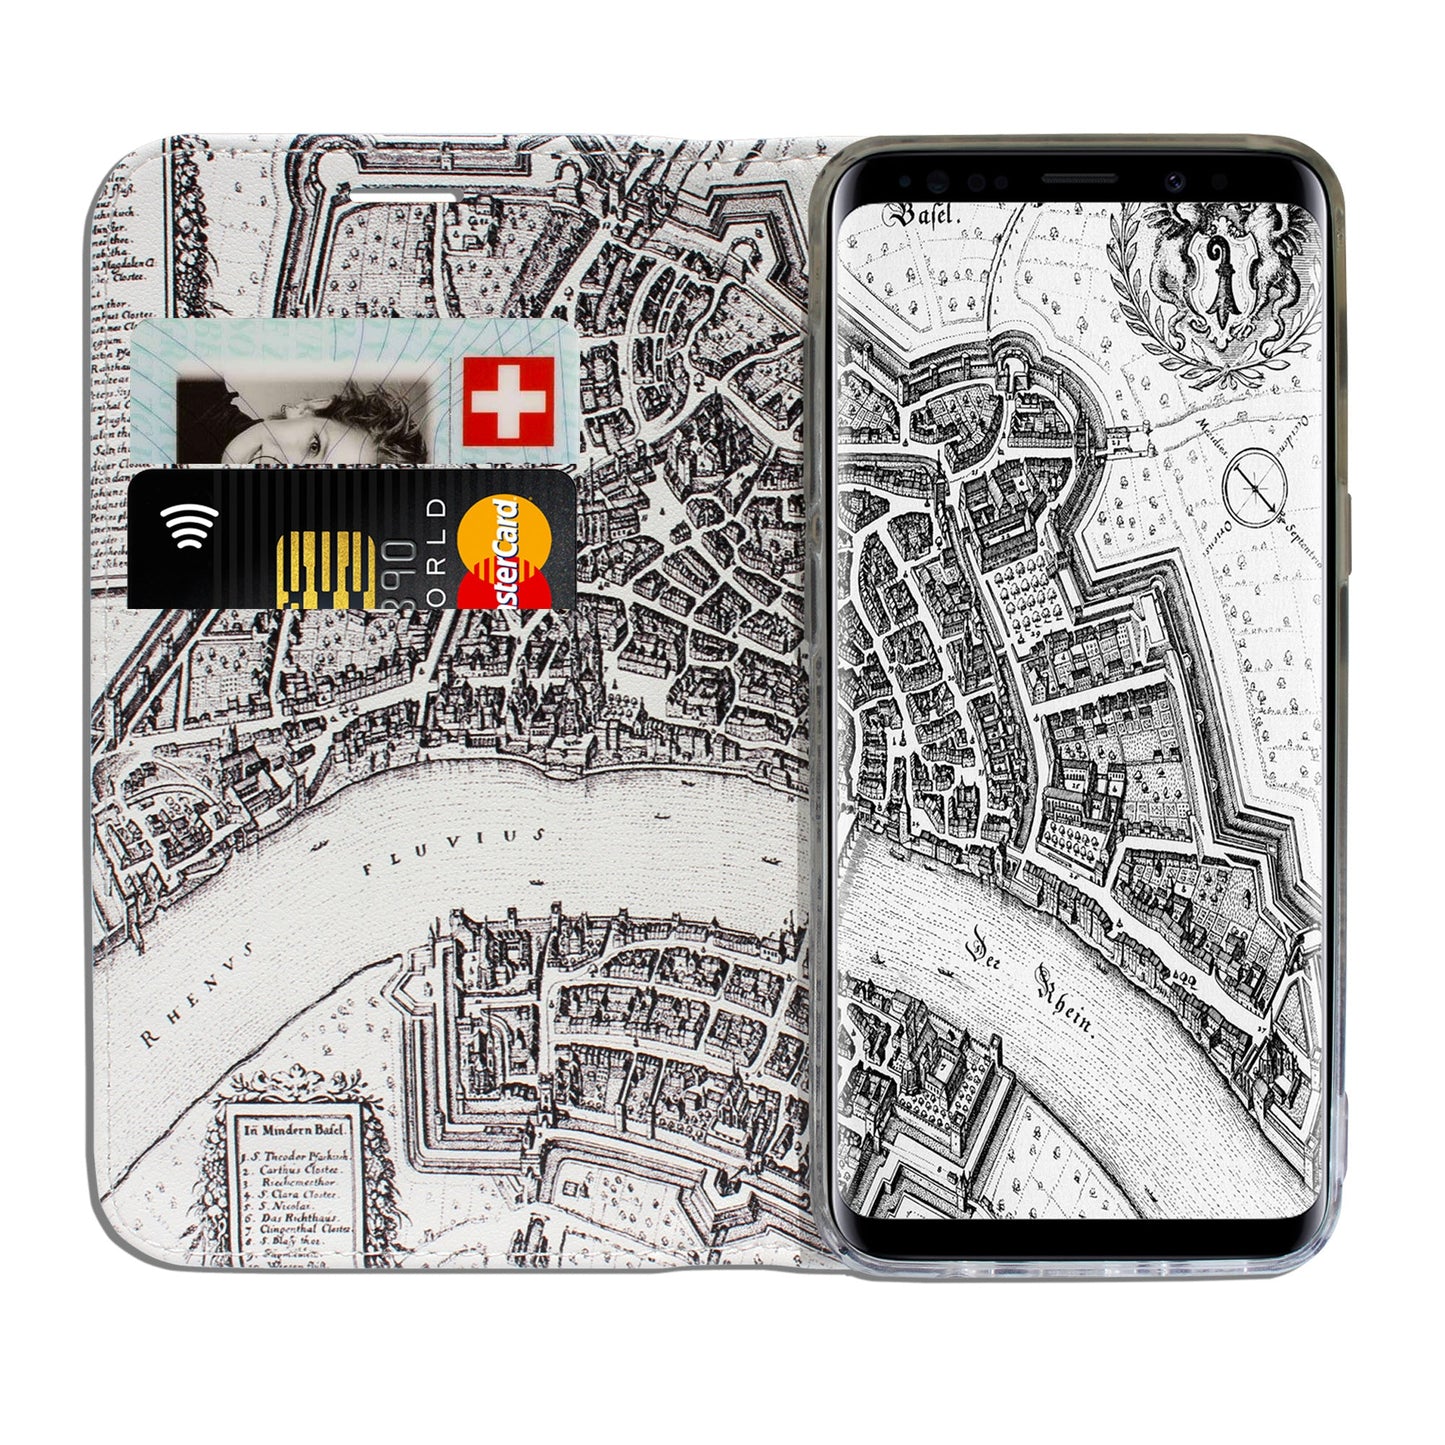 Basel Merian Panorama Case for Samsung Galaxy Note 8